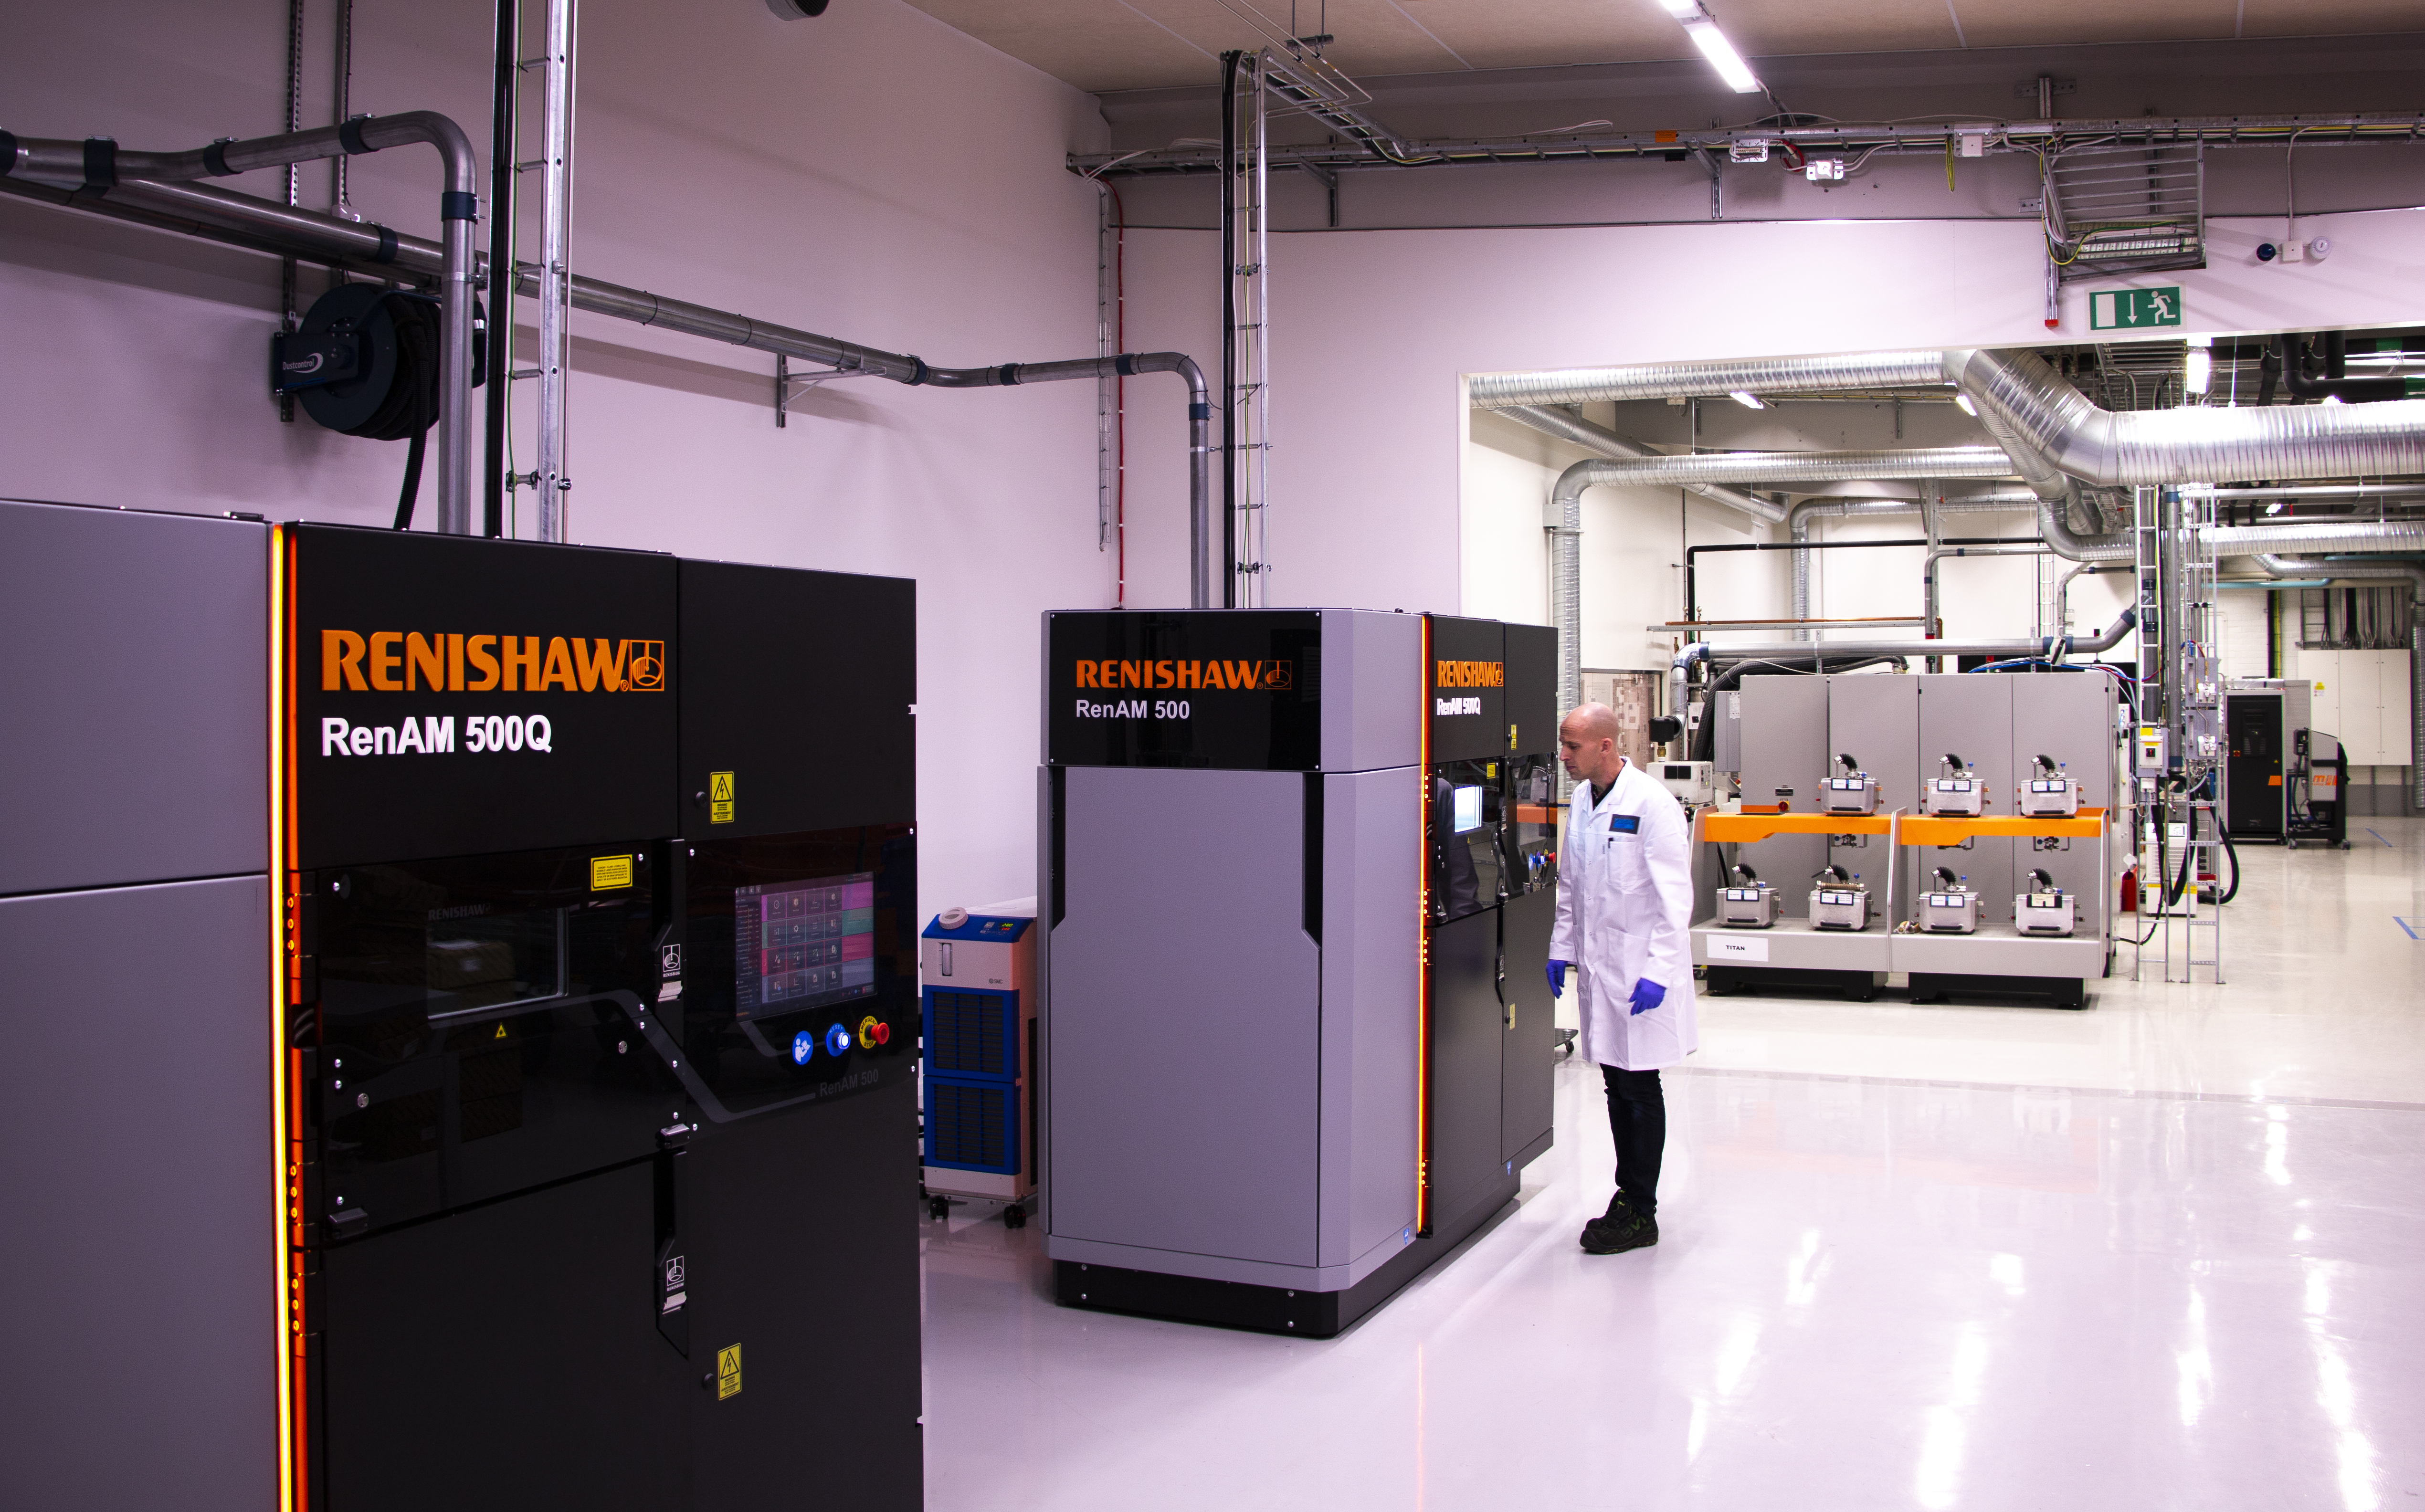 Renishaw has supplied Sandvik Additive Manufacturing with its multi-laser RenAM 500Q systems.